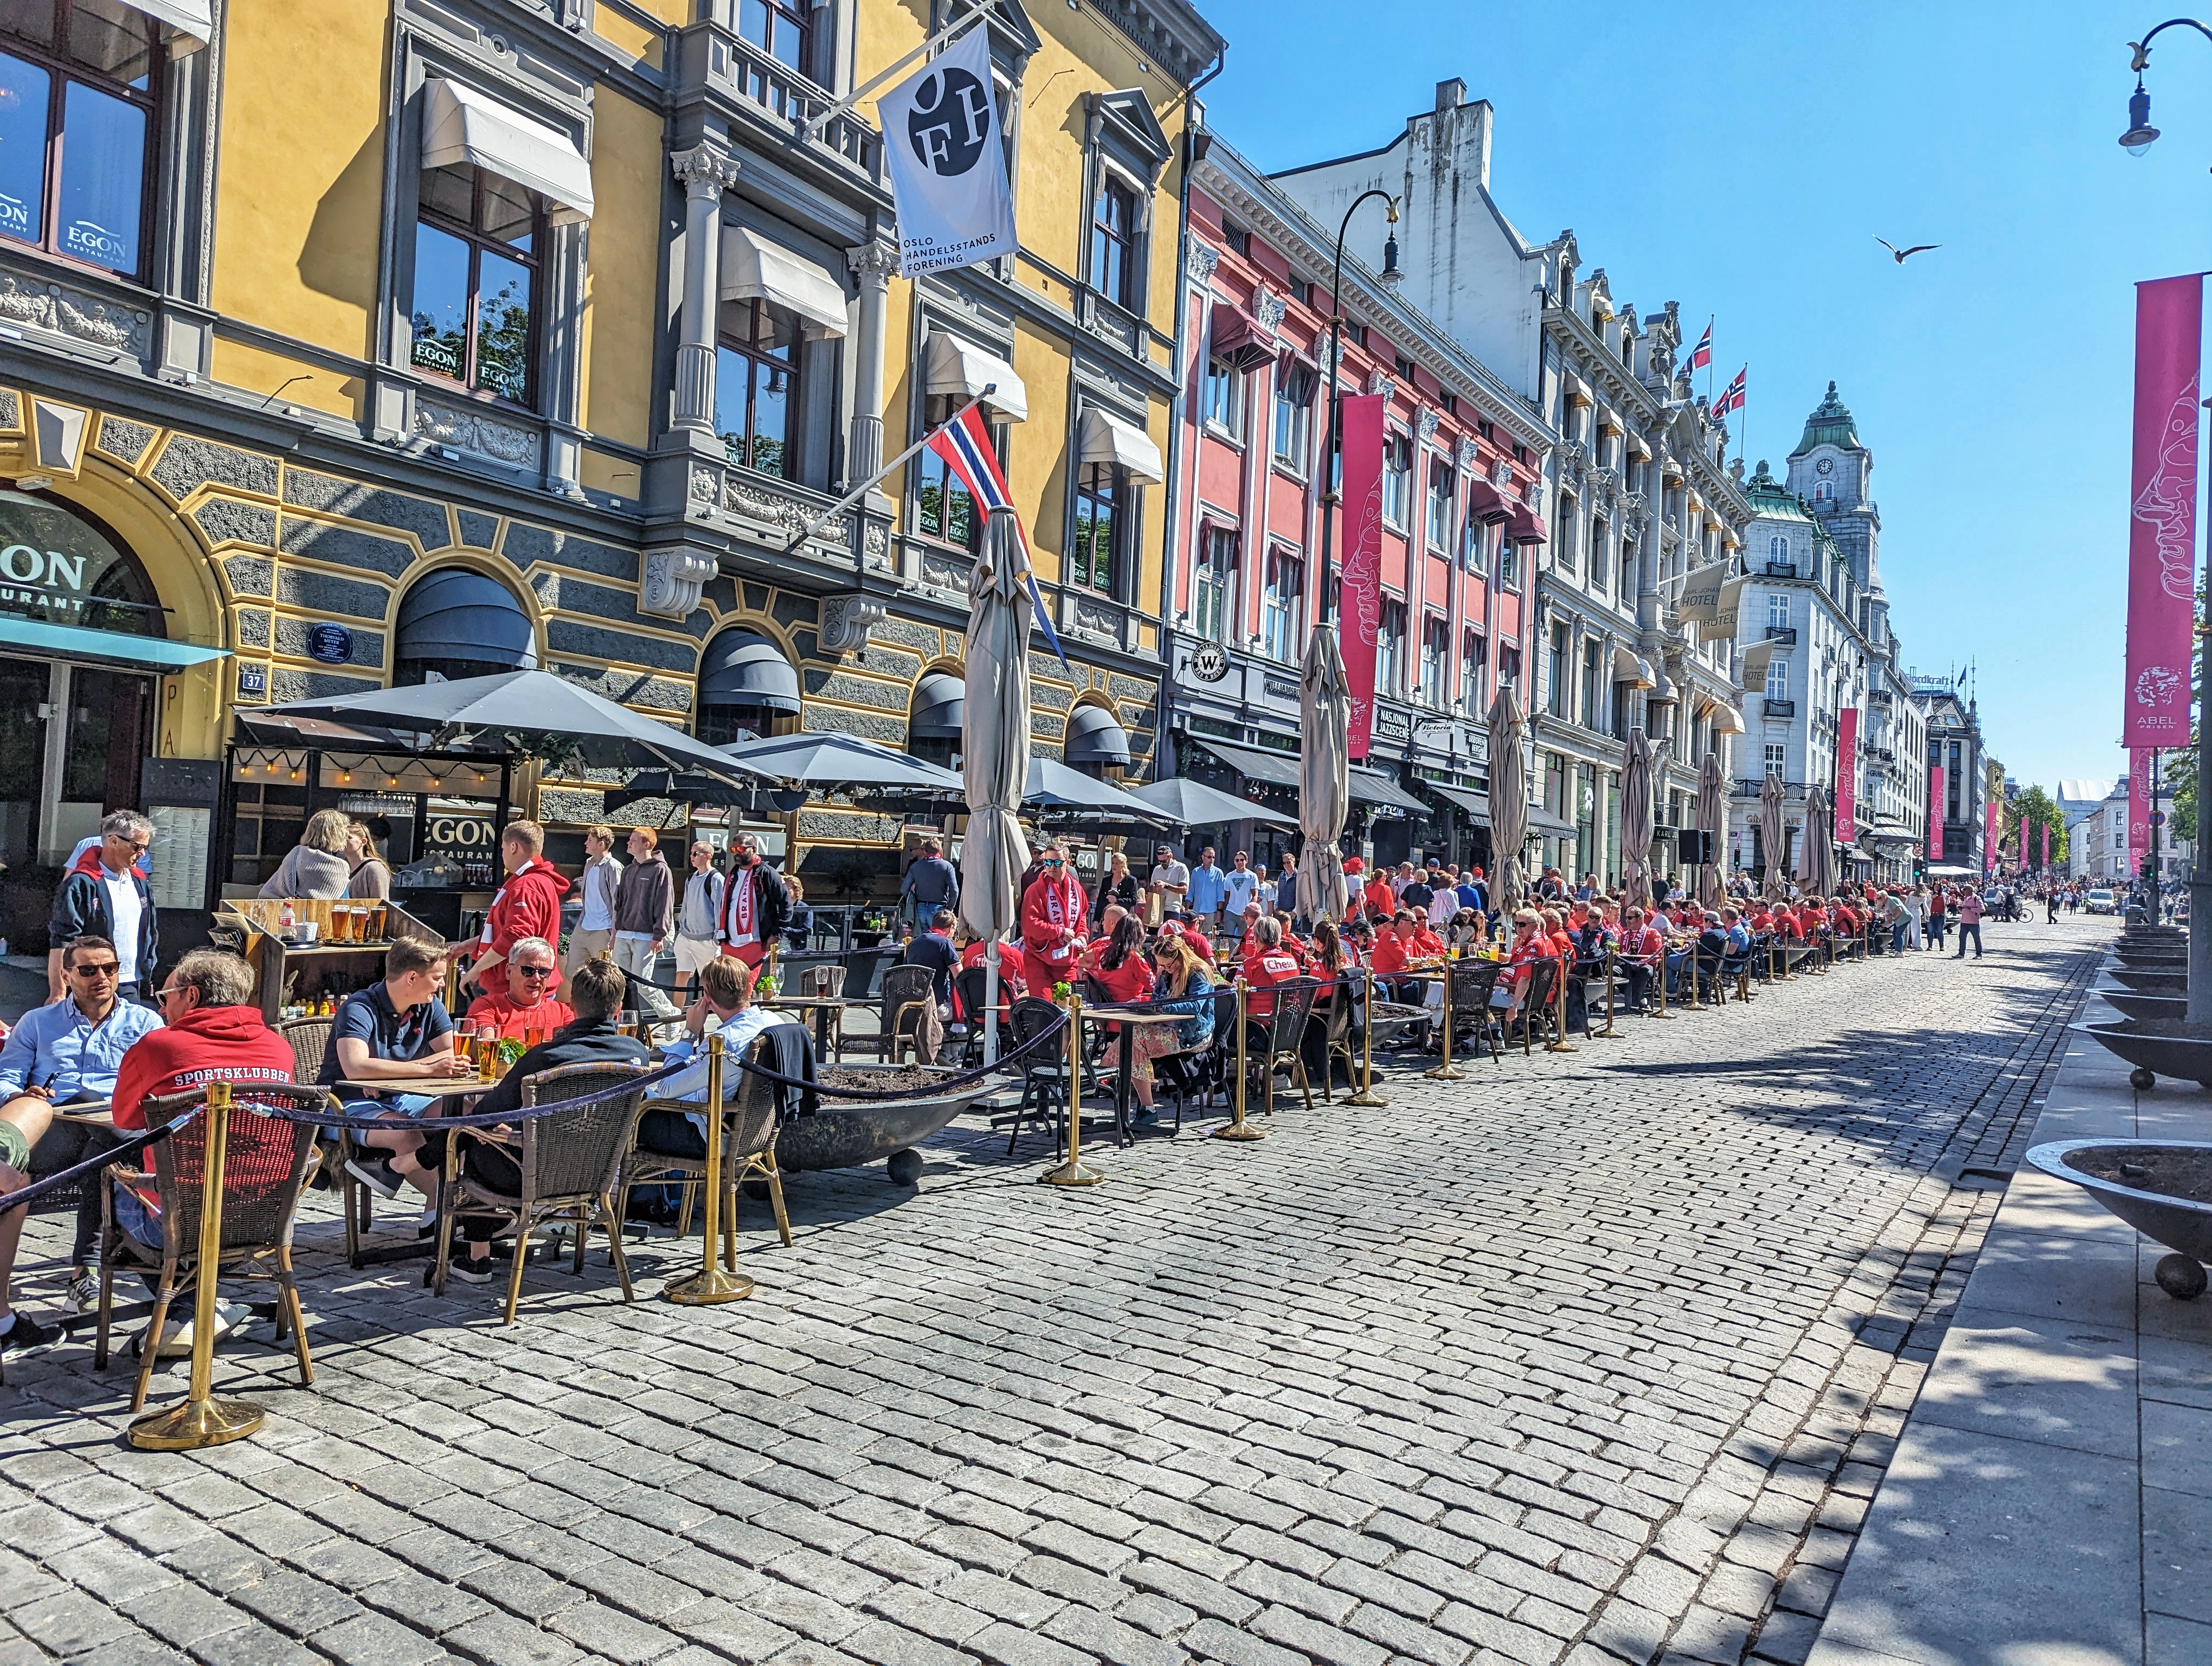 Flocks of people dine outside along Karl Johans Gate, a main thoroughfare in Oslo, Norway